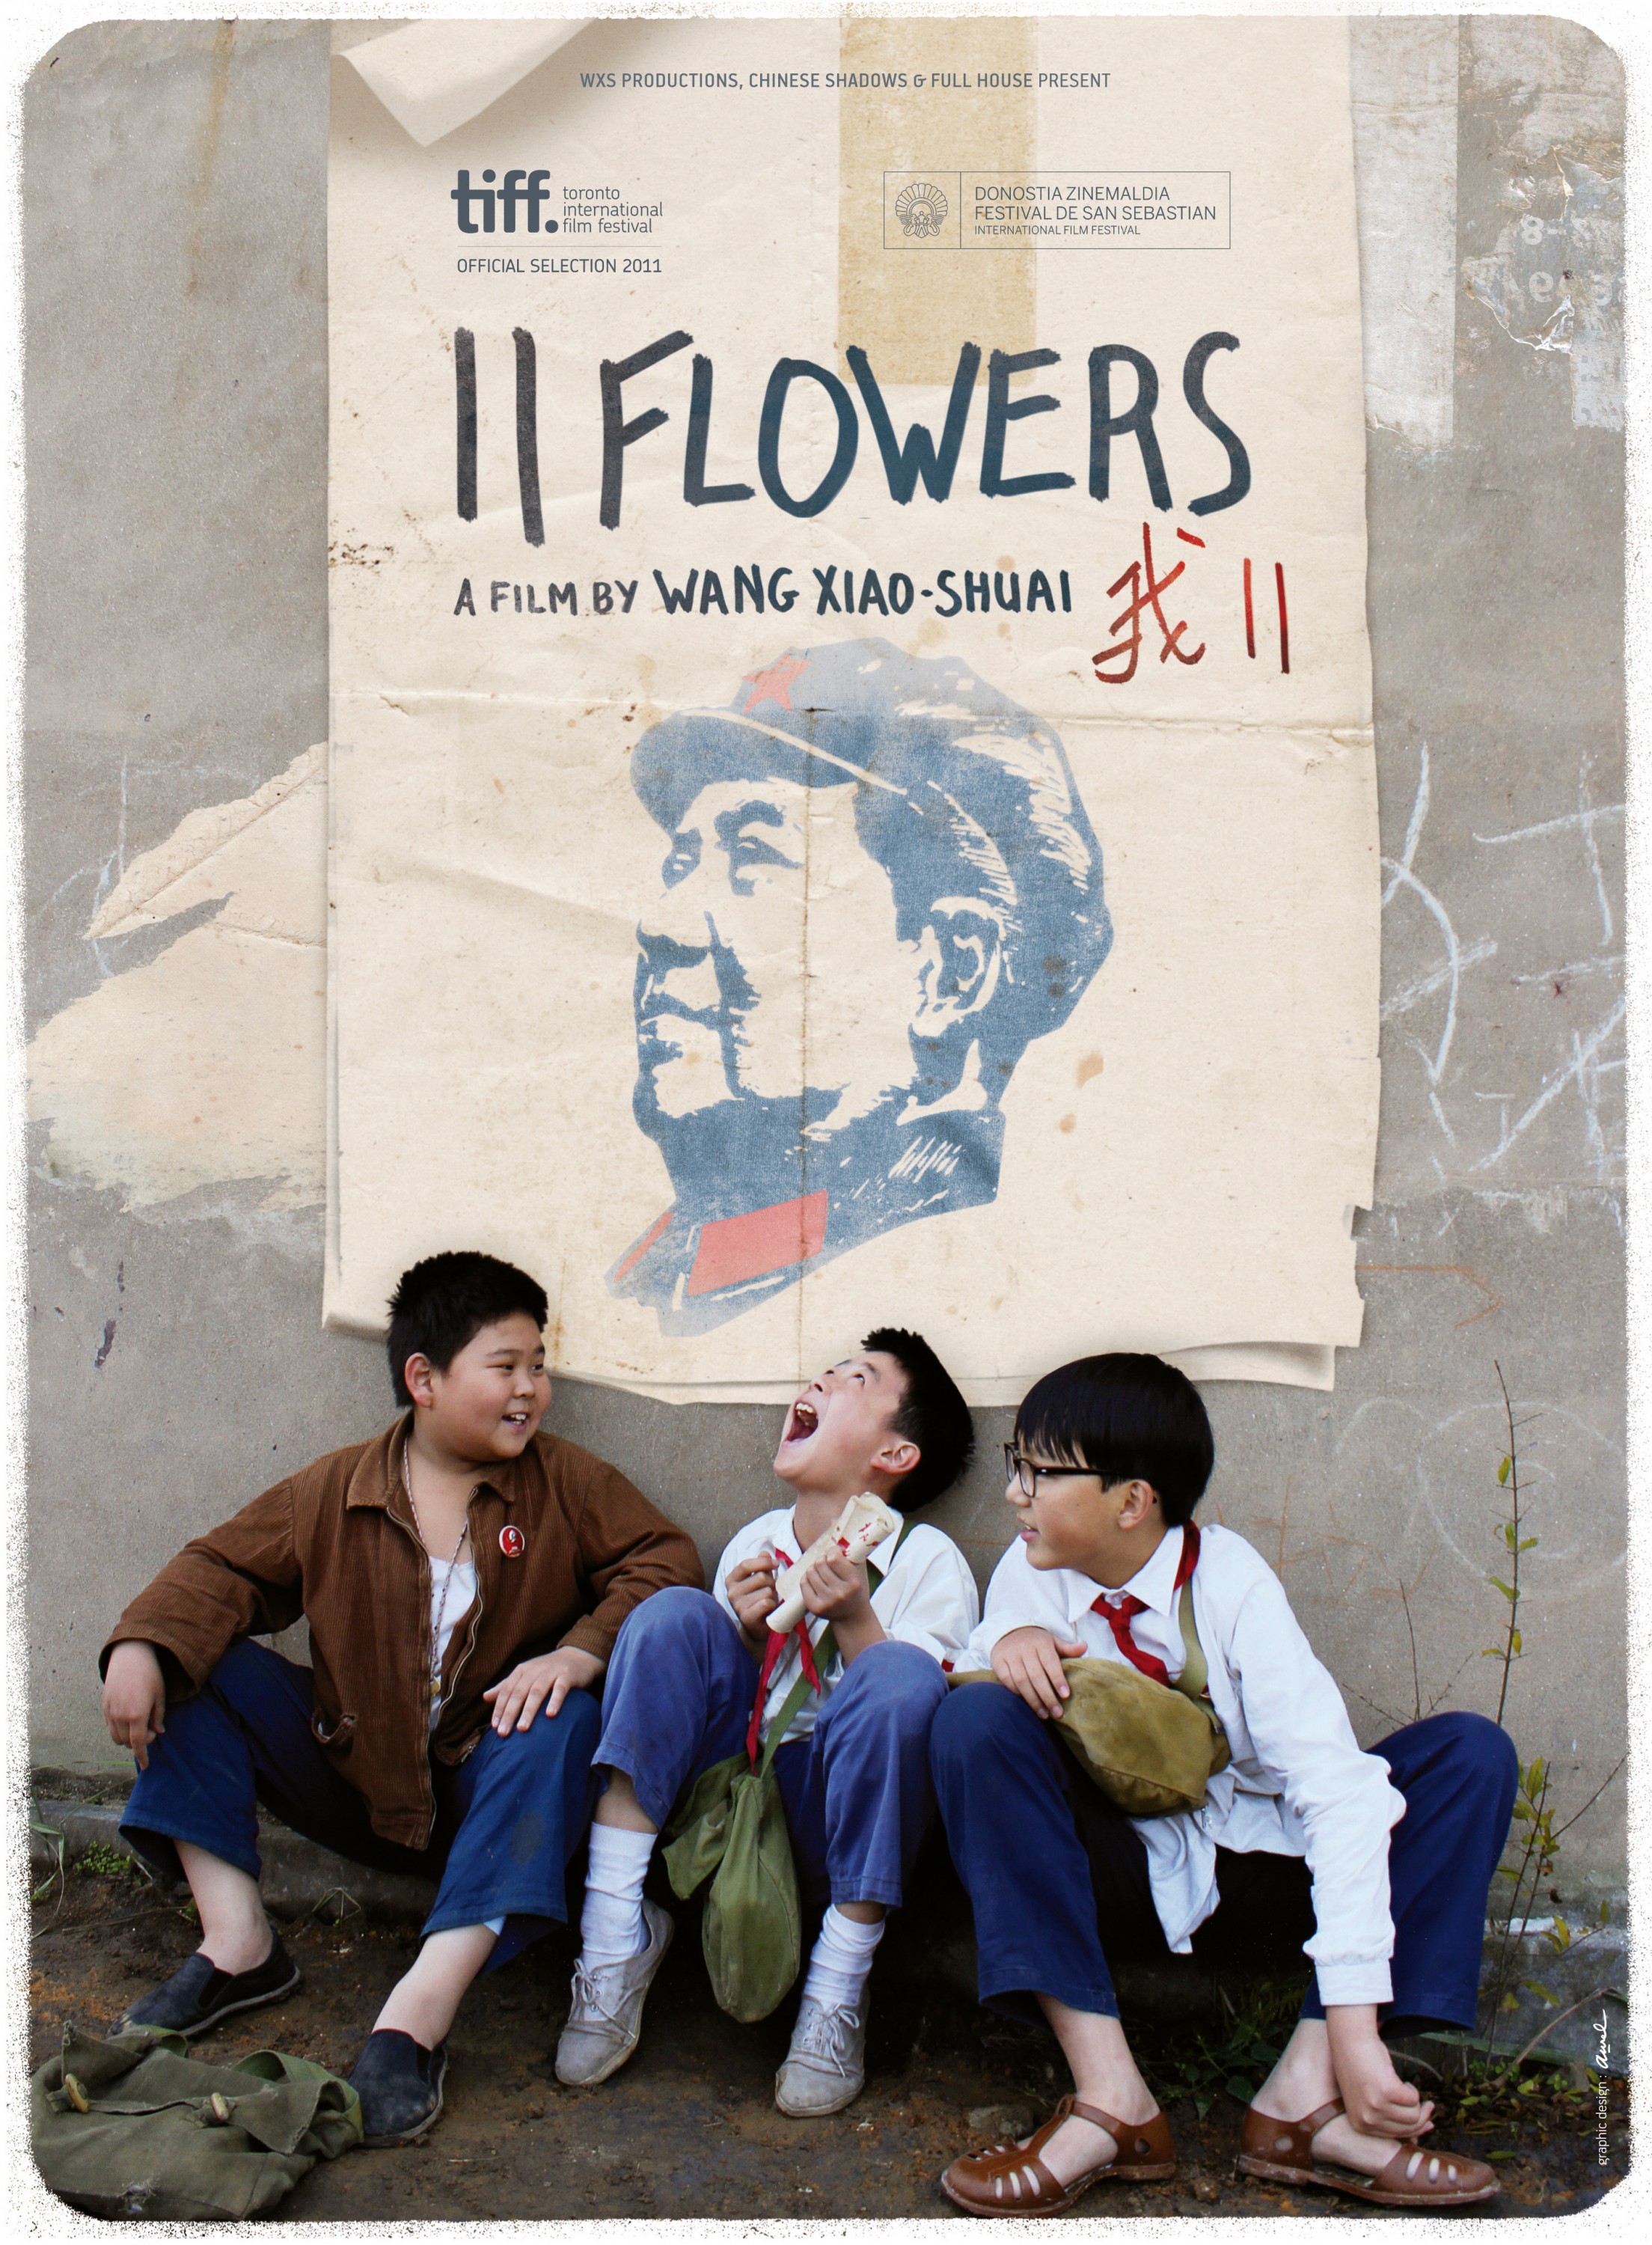 Mega Sized Movie Poster Image for 11 Flowers 